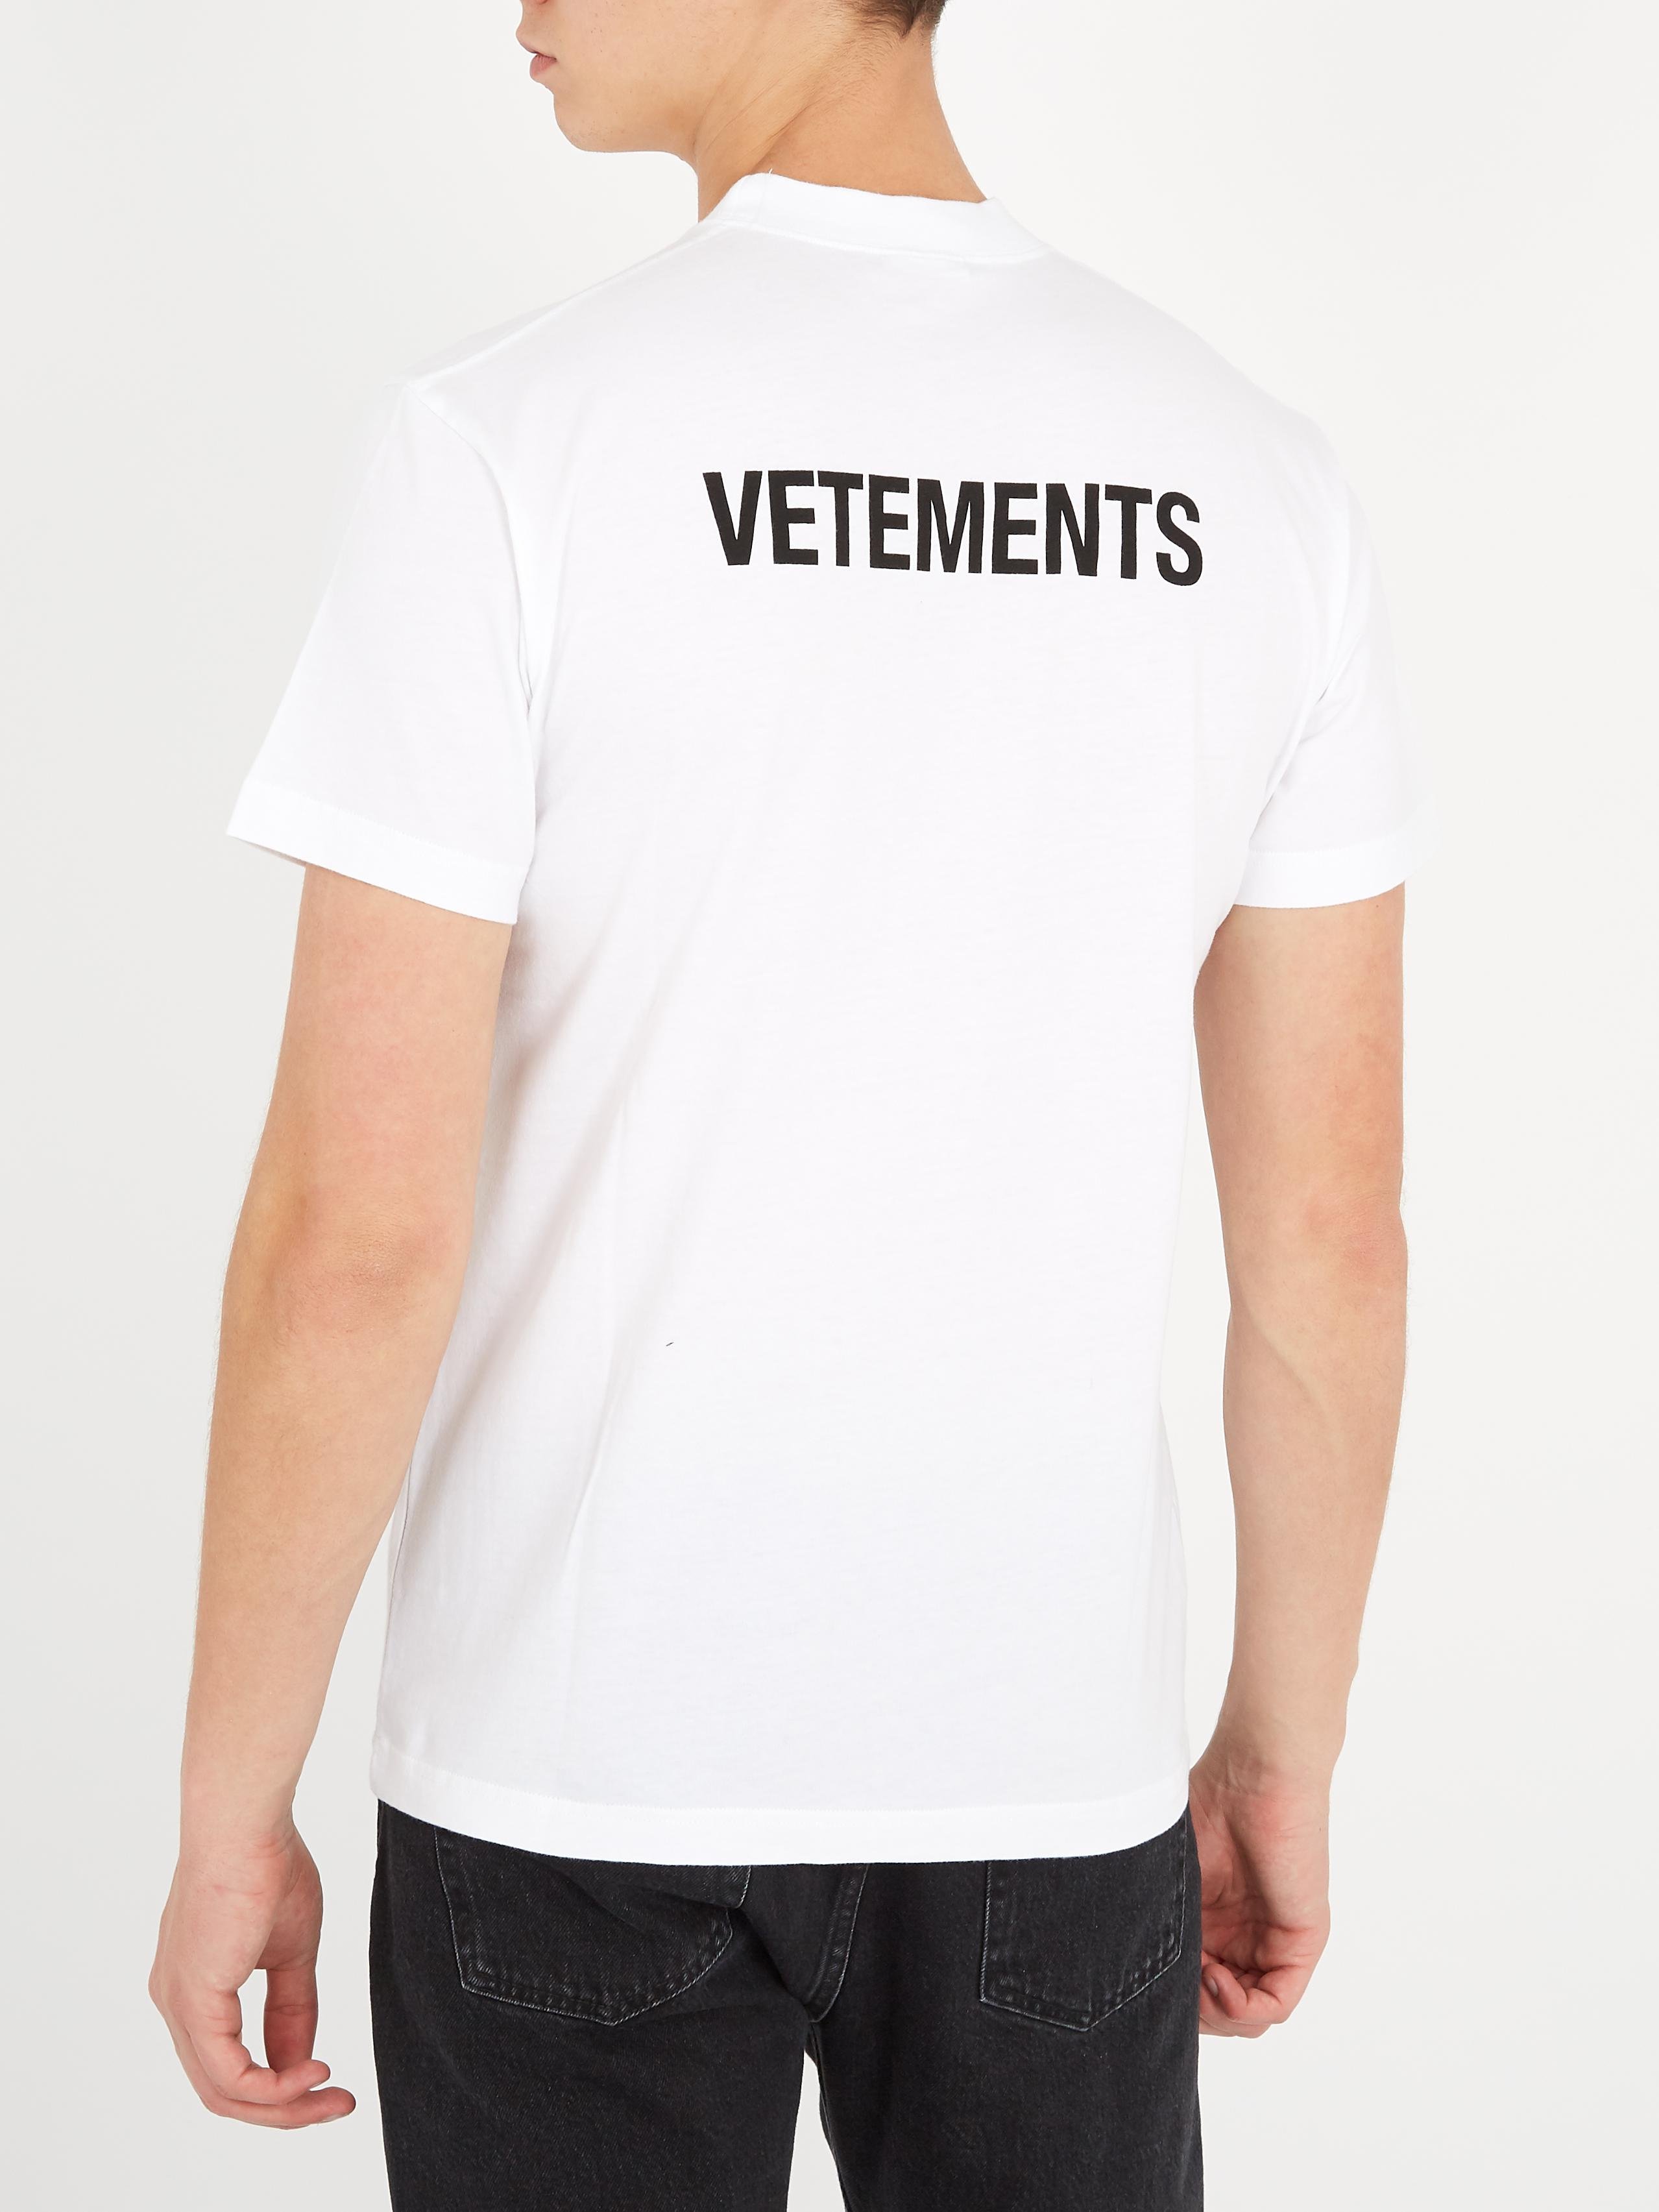 Vetements Staff Cotton T-shirt in White for Men - Lyst